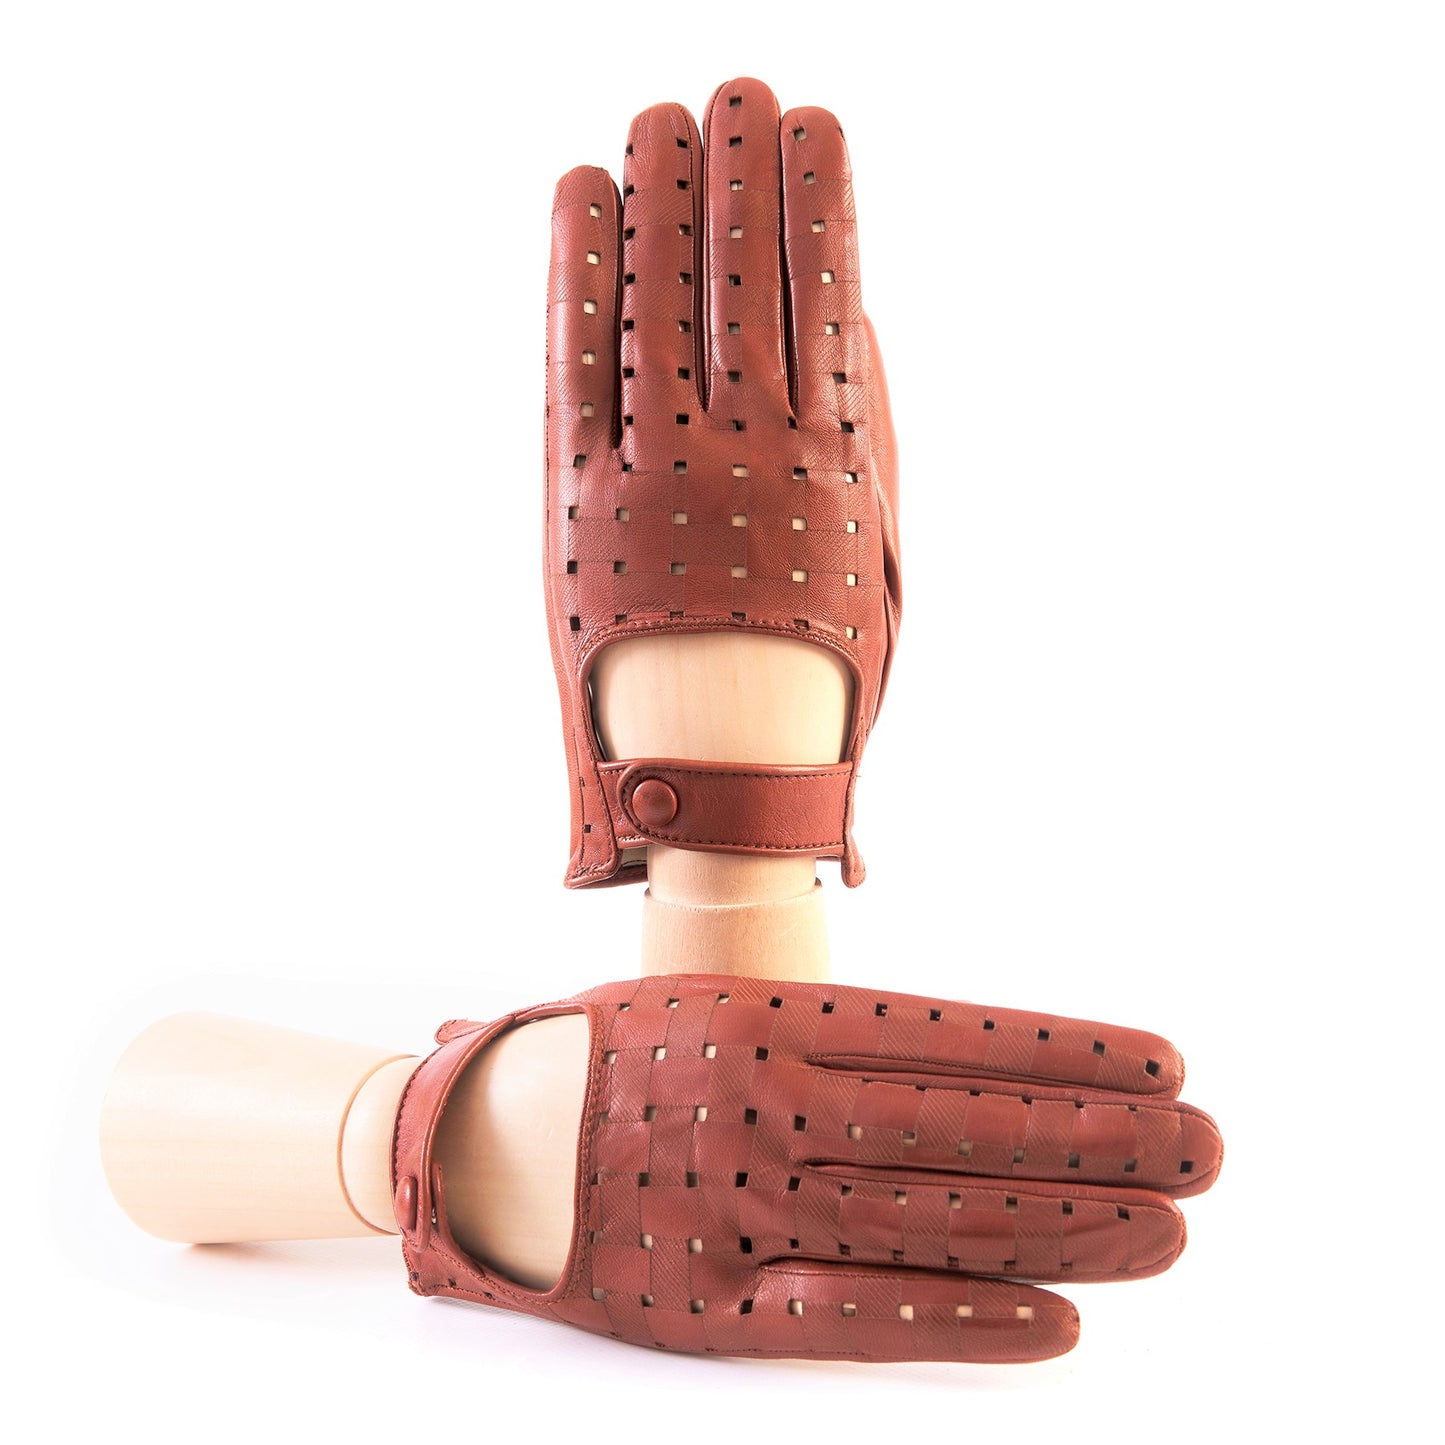 Men's cognac nappa leather driving gloves with laser-cut details